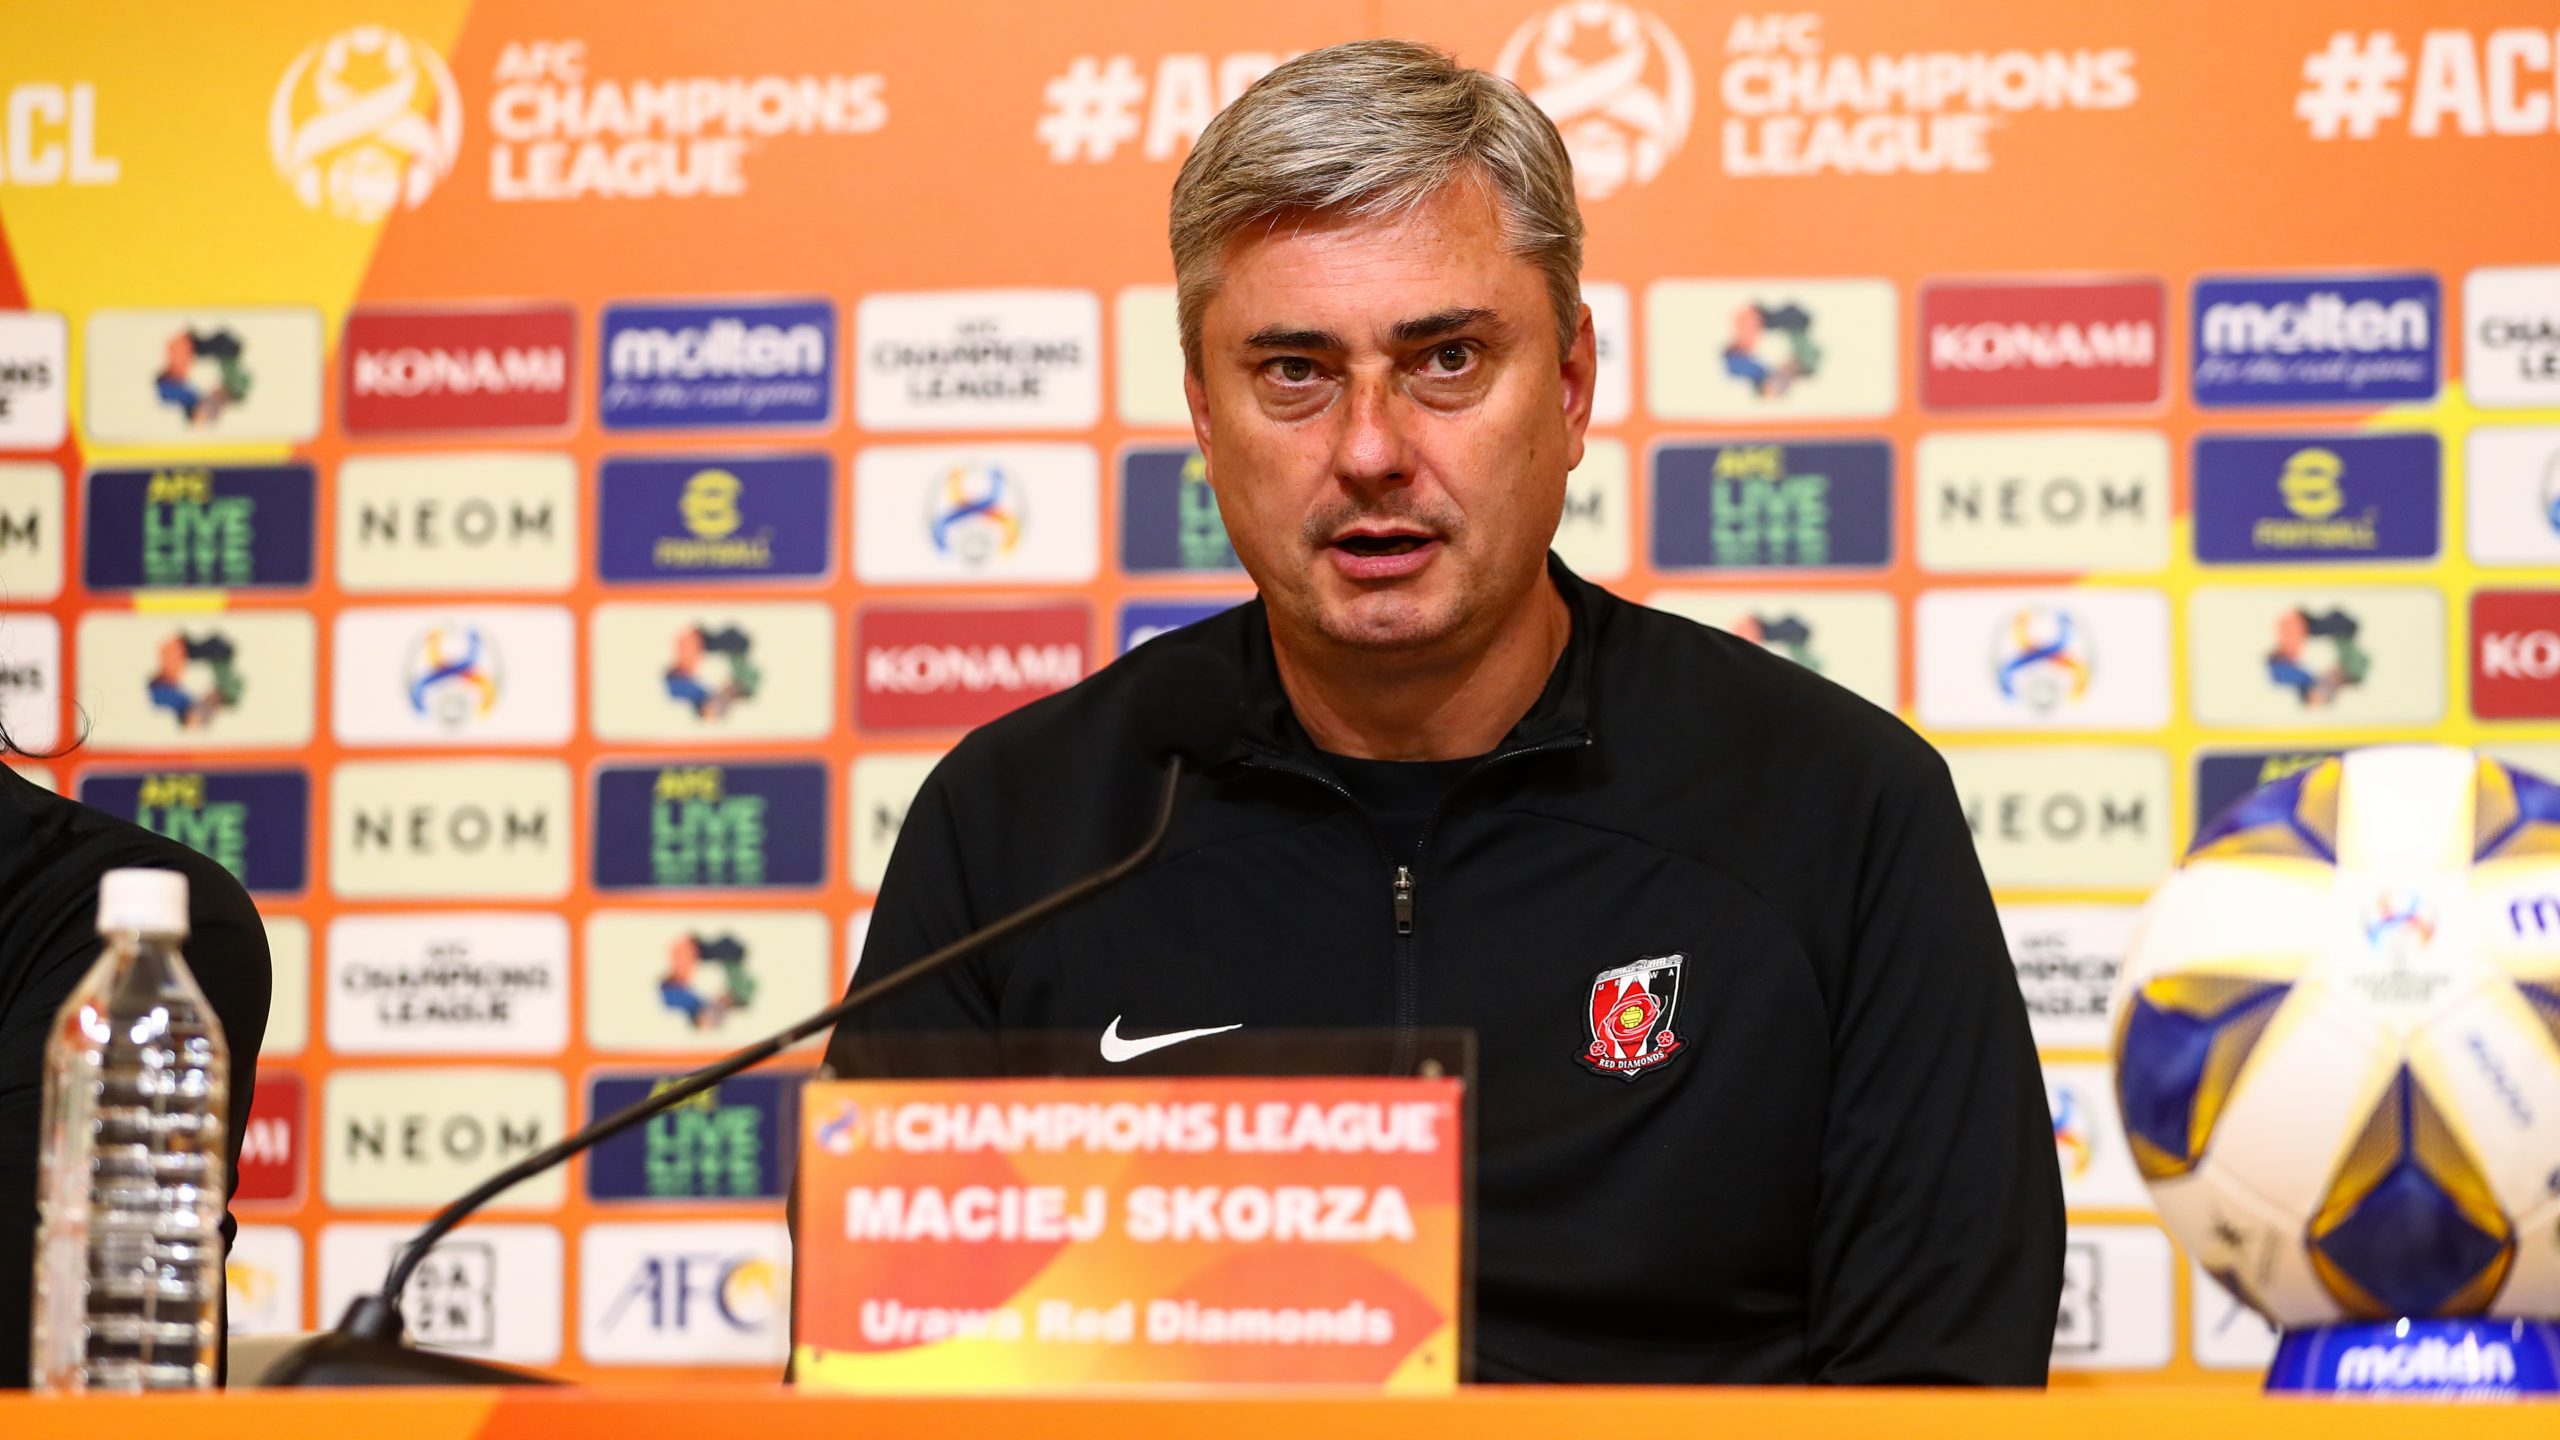 ACL Group Stage MD3 Match against Pohang Steelers Manager Maciej Skorza and Takuya Ogiwara attend the official press conference the day before the match